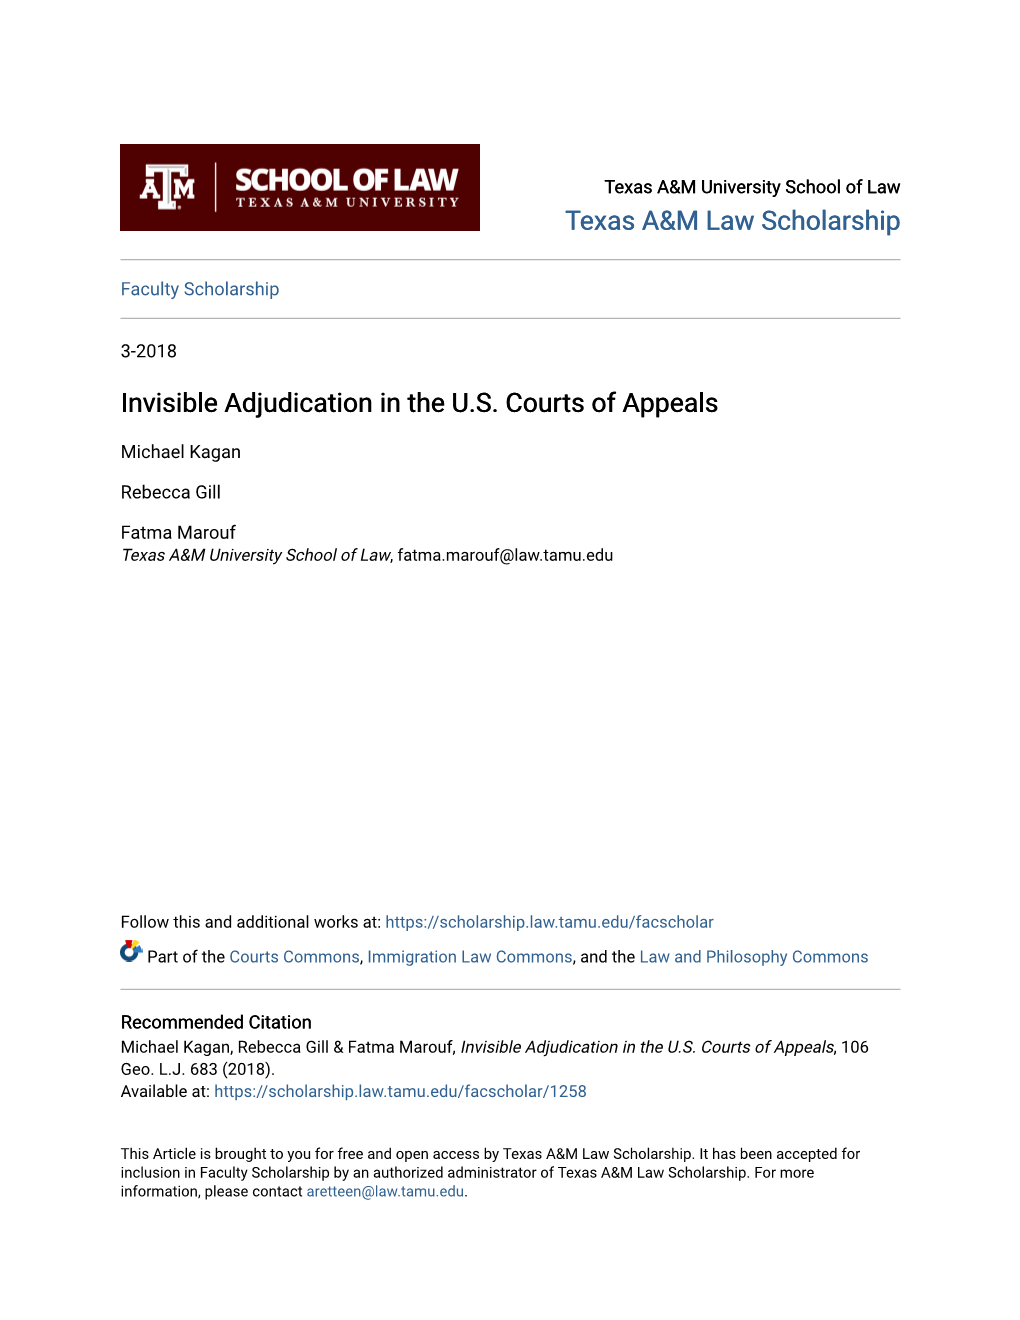 Invisible Adjudication in the U.S. Courts of Appeals